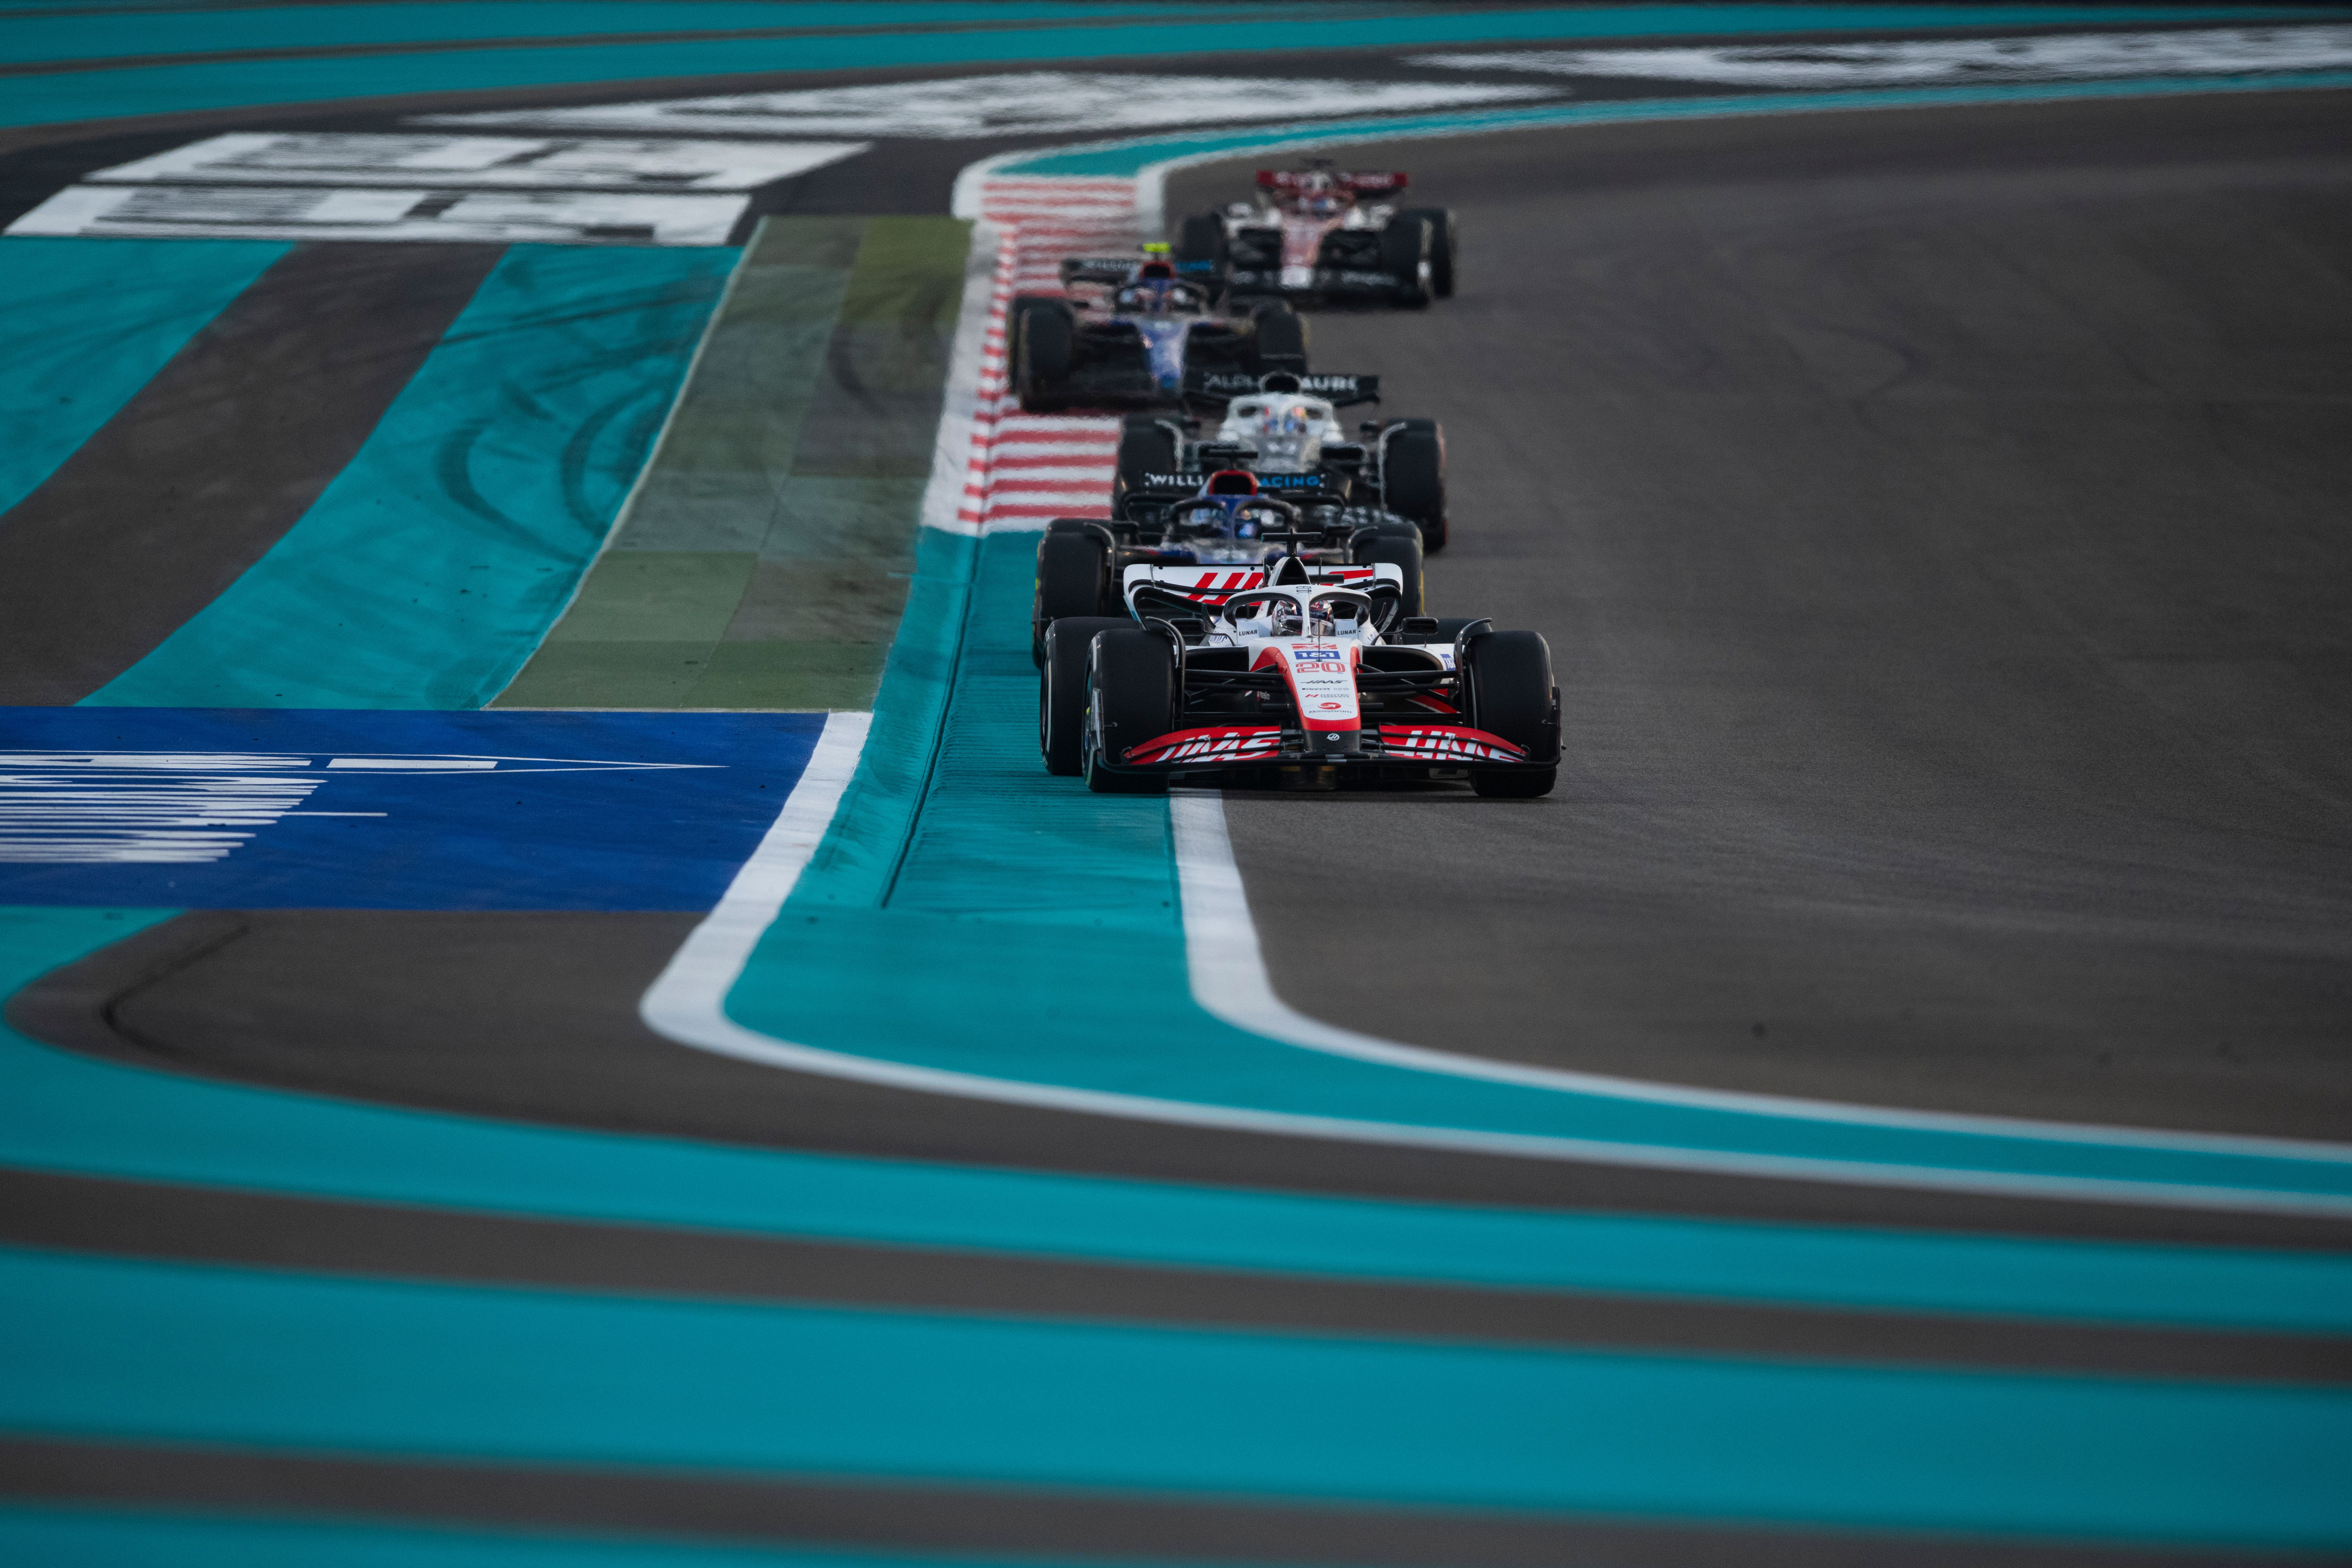 Kevin Magnussen leads four cars in Abu Dhabi